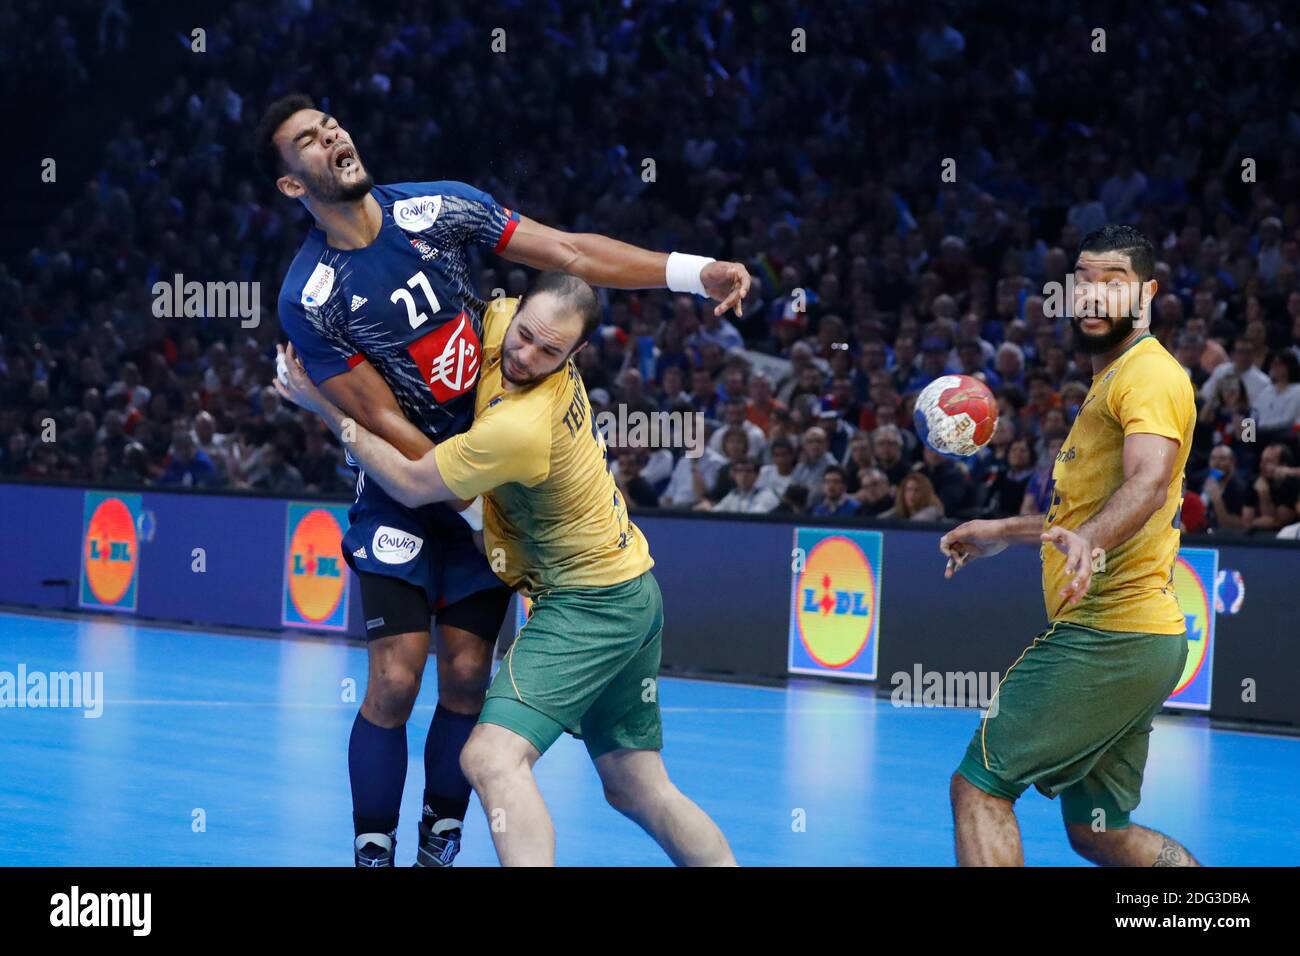 France's Adrien Dipanda battling Brazil's Henrique Teixeira during Group A First Round game of the 2017 Handball World Championship France vs Brazil in AccorHotels Arena, Paris, France, on January 11th, 2017. France won 31-16. Photo by Henri Szwarc/ABACAPRESS.COM Stock Photo